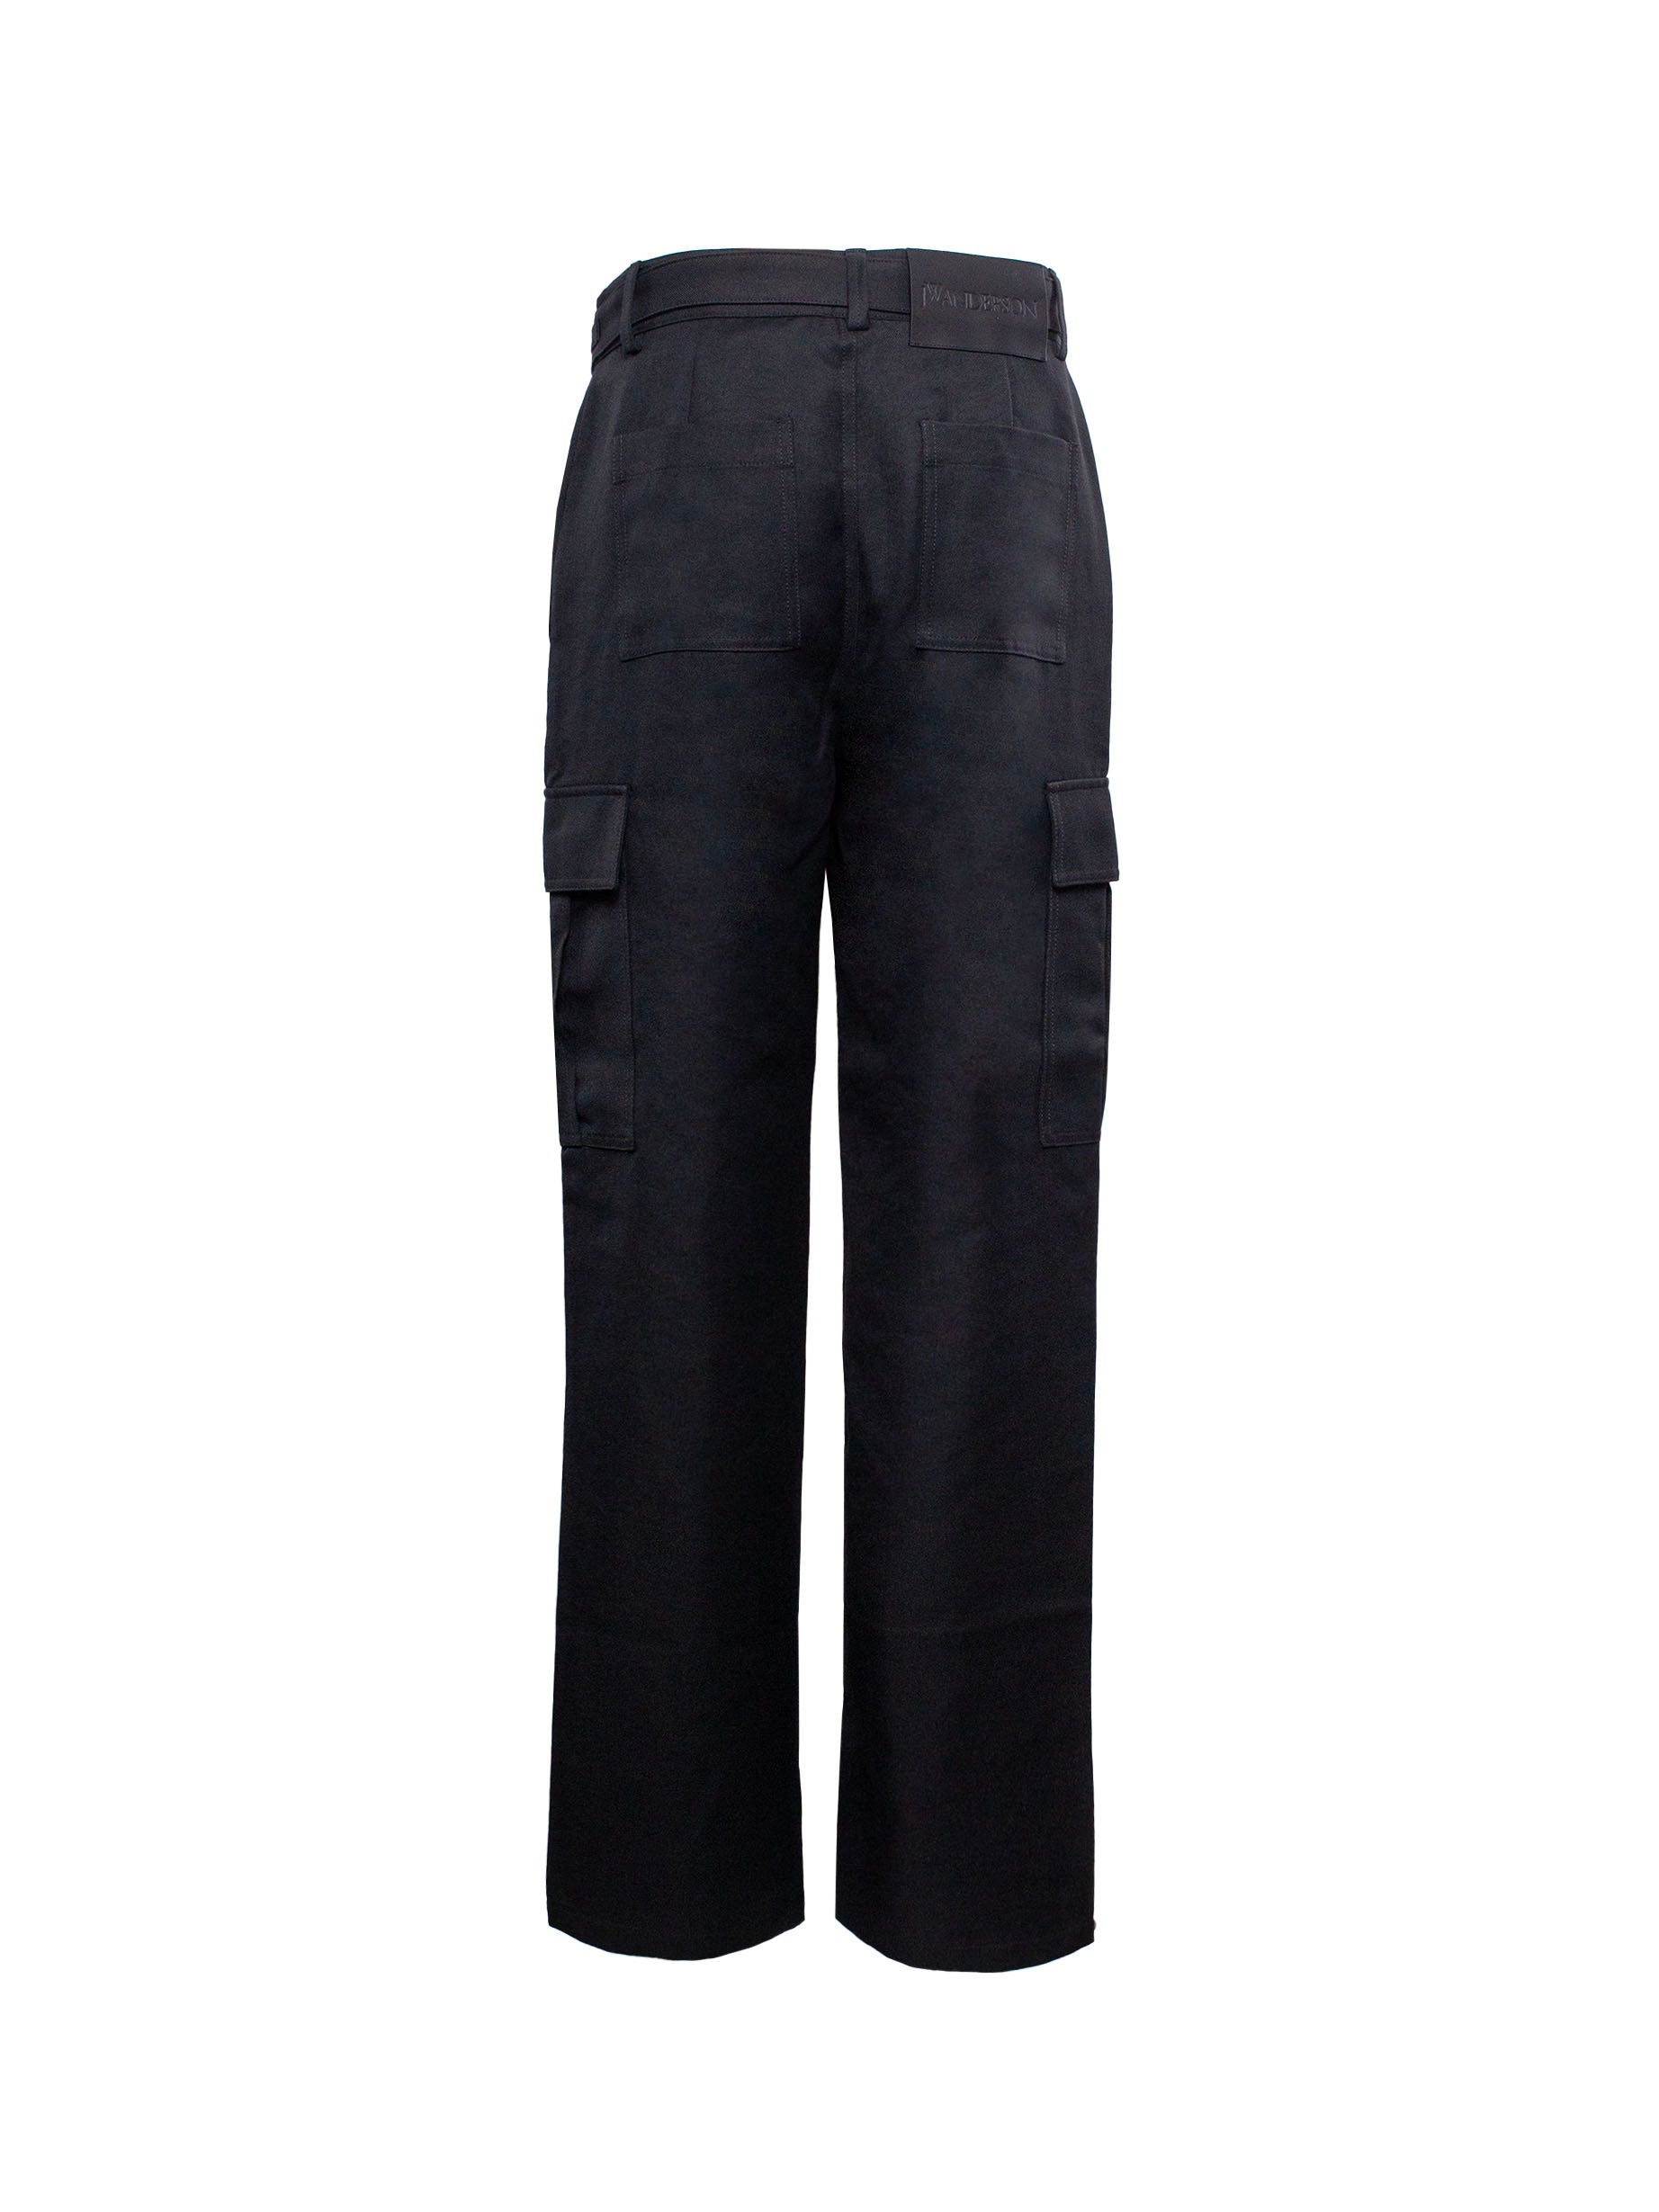 JW ANDERSON FOLD-OVER TAPERED TROUSERS